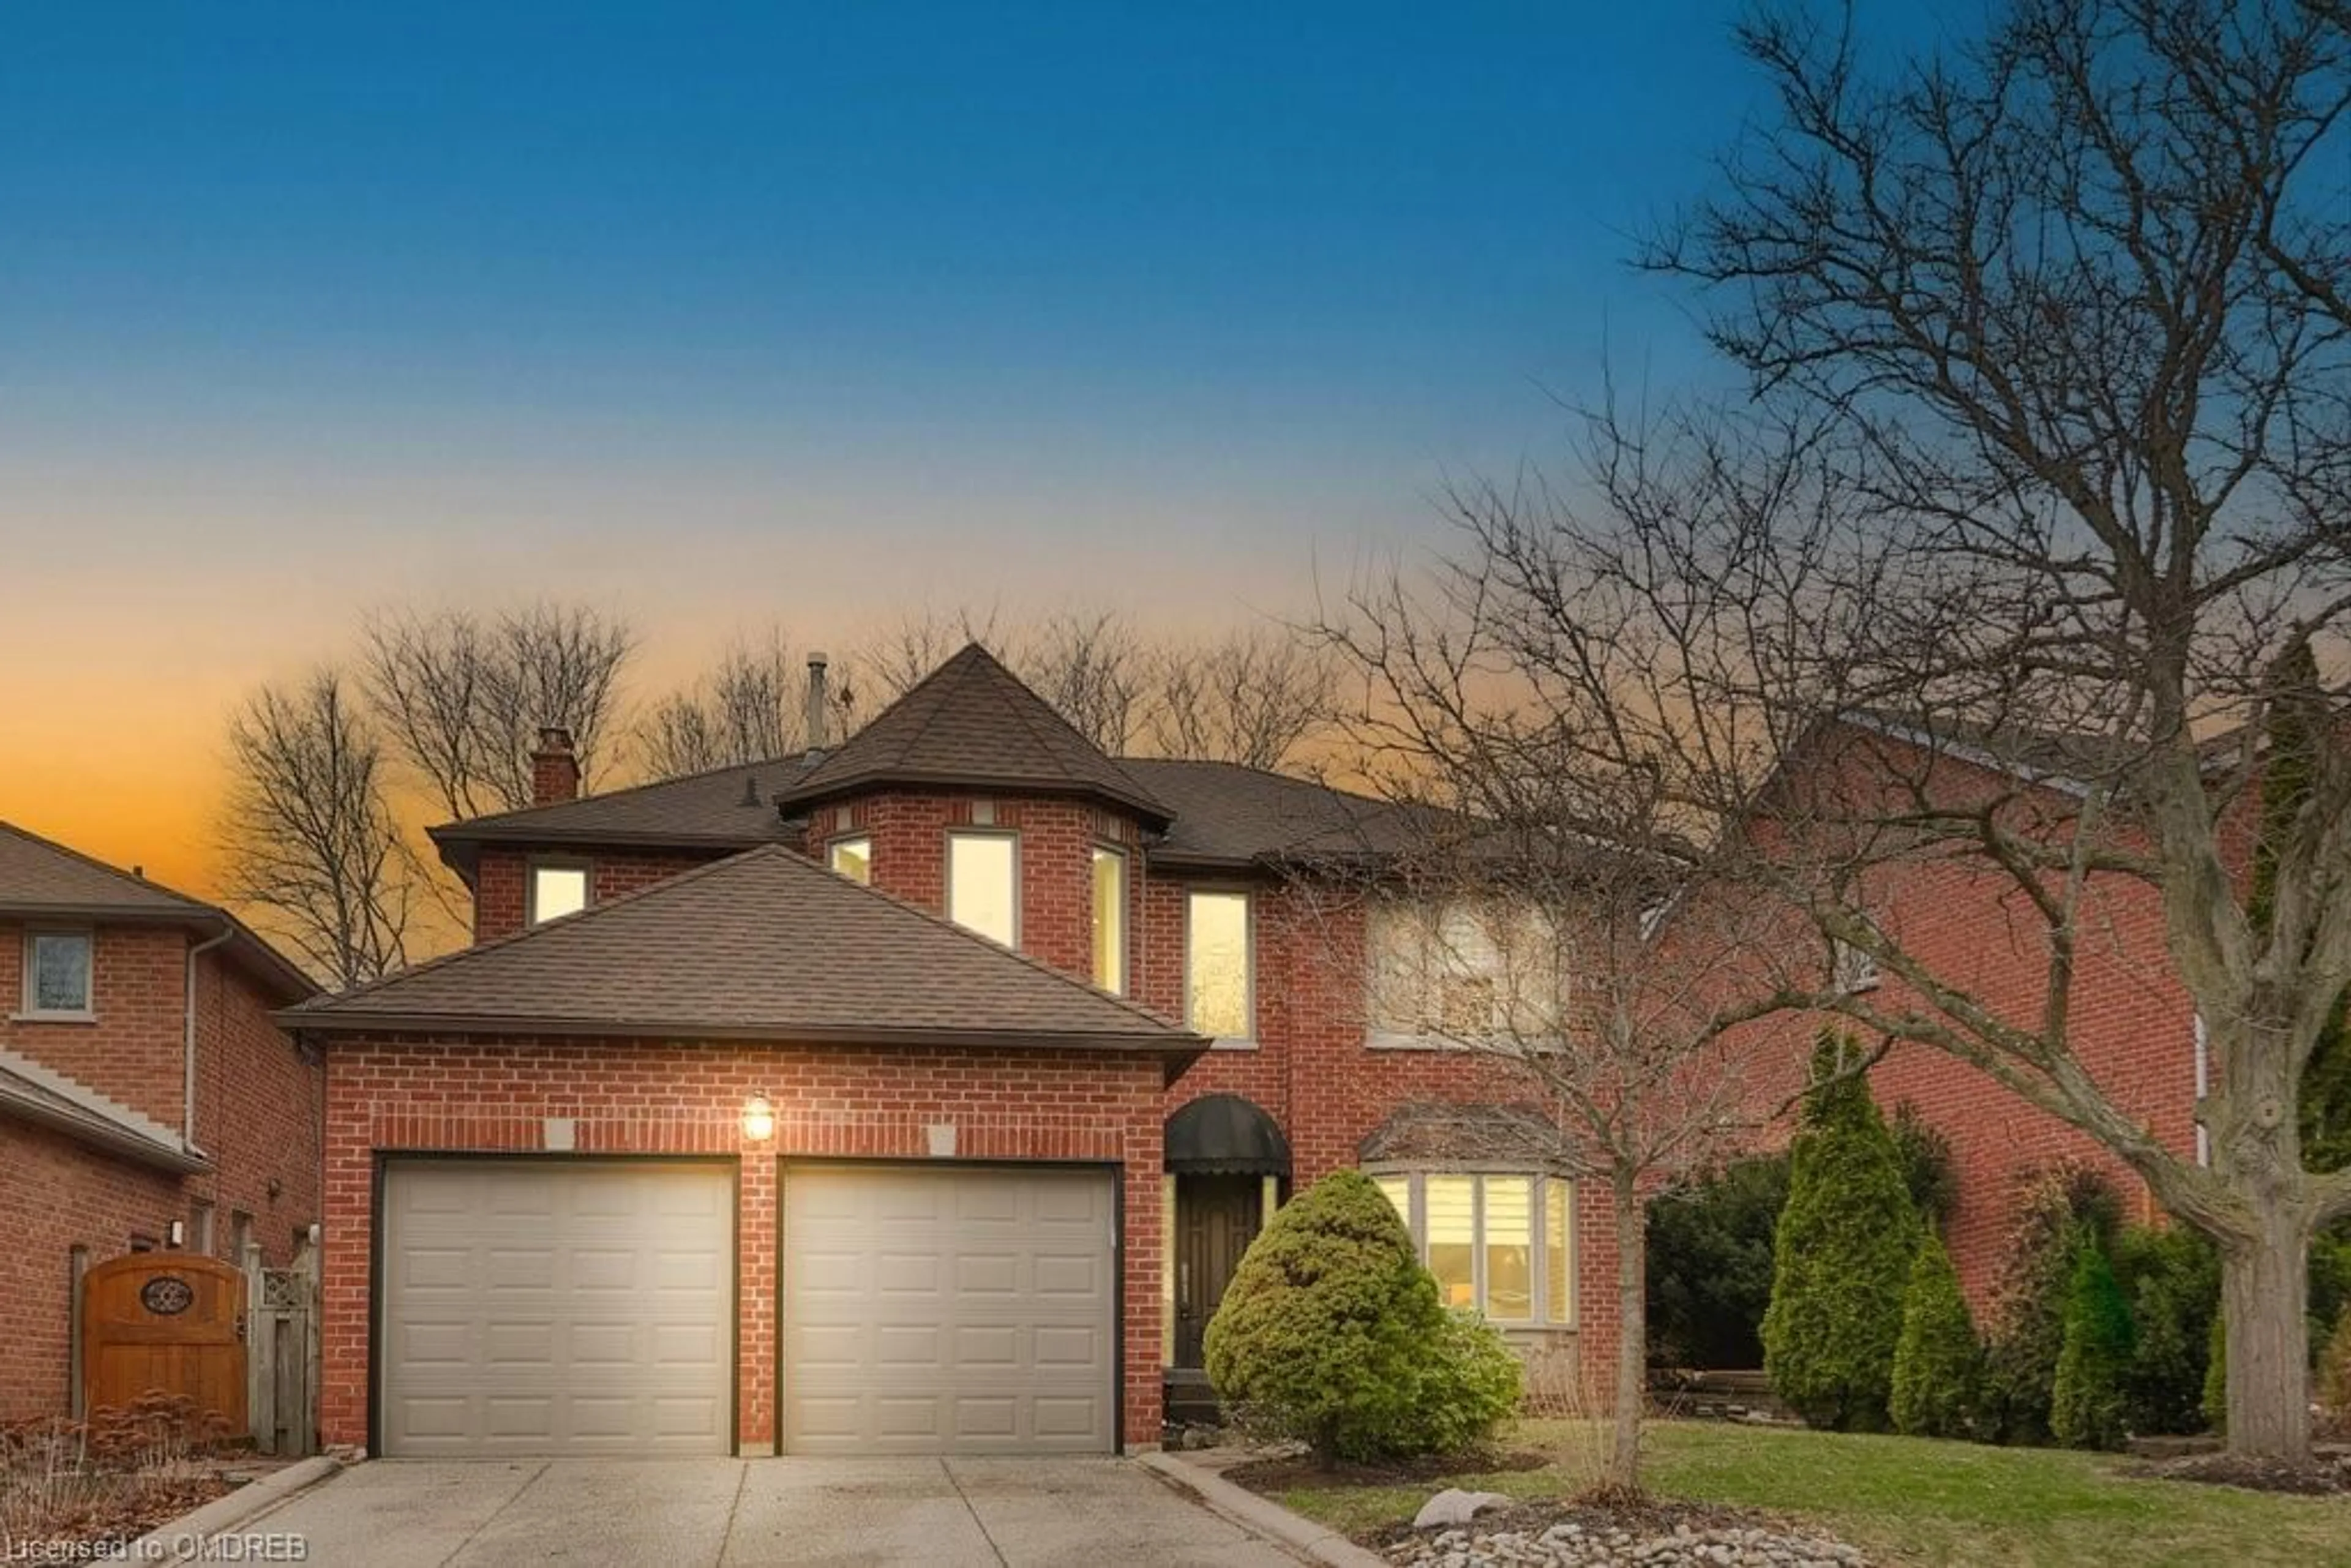 Home with brick exterior material for 2028 Markle Dr, Oakville Ontario L6H 3T3